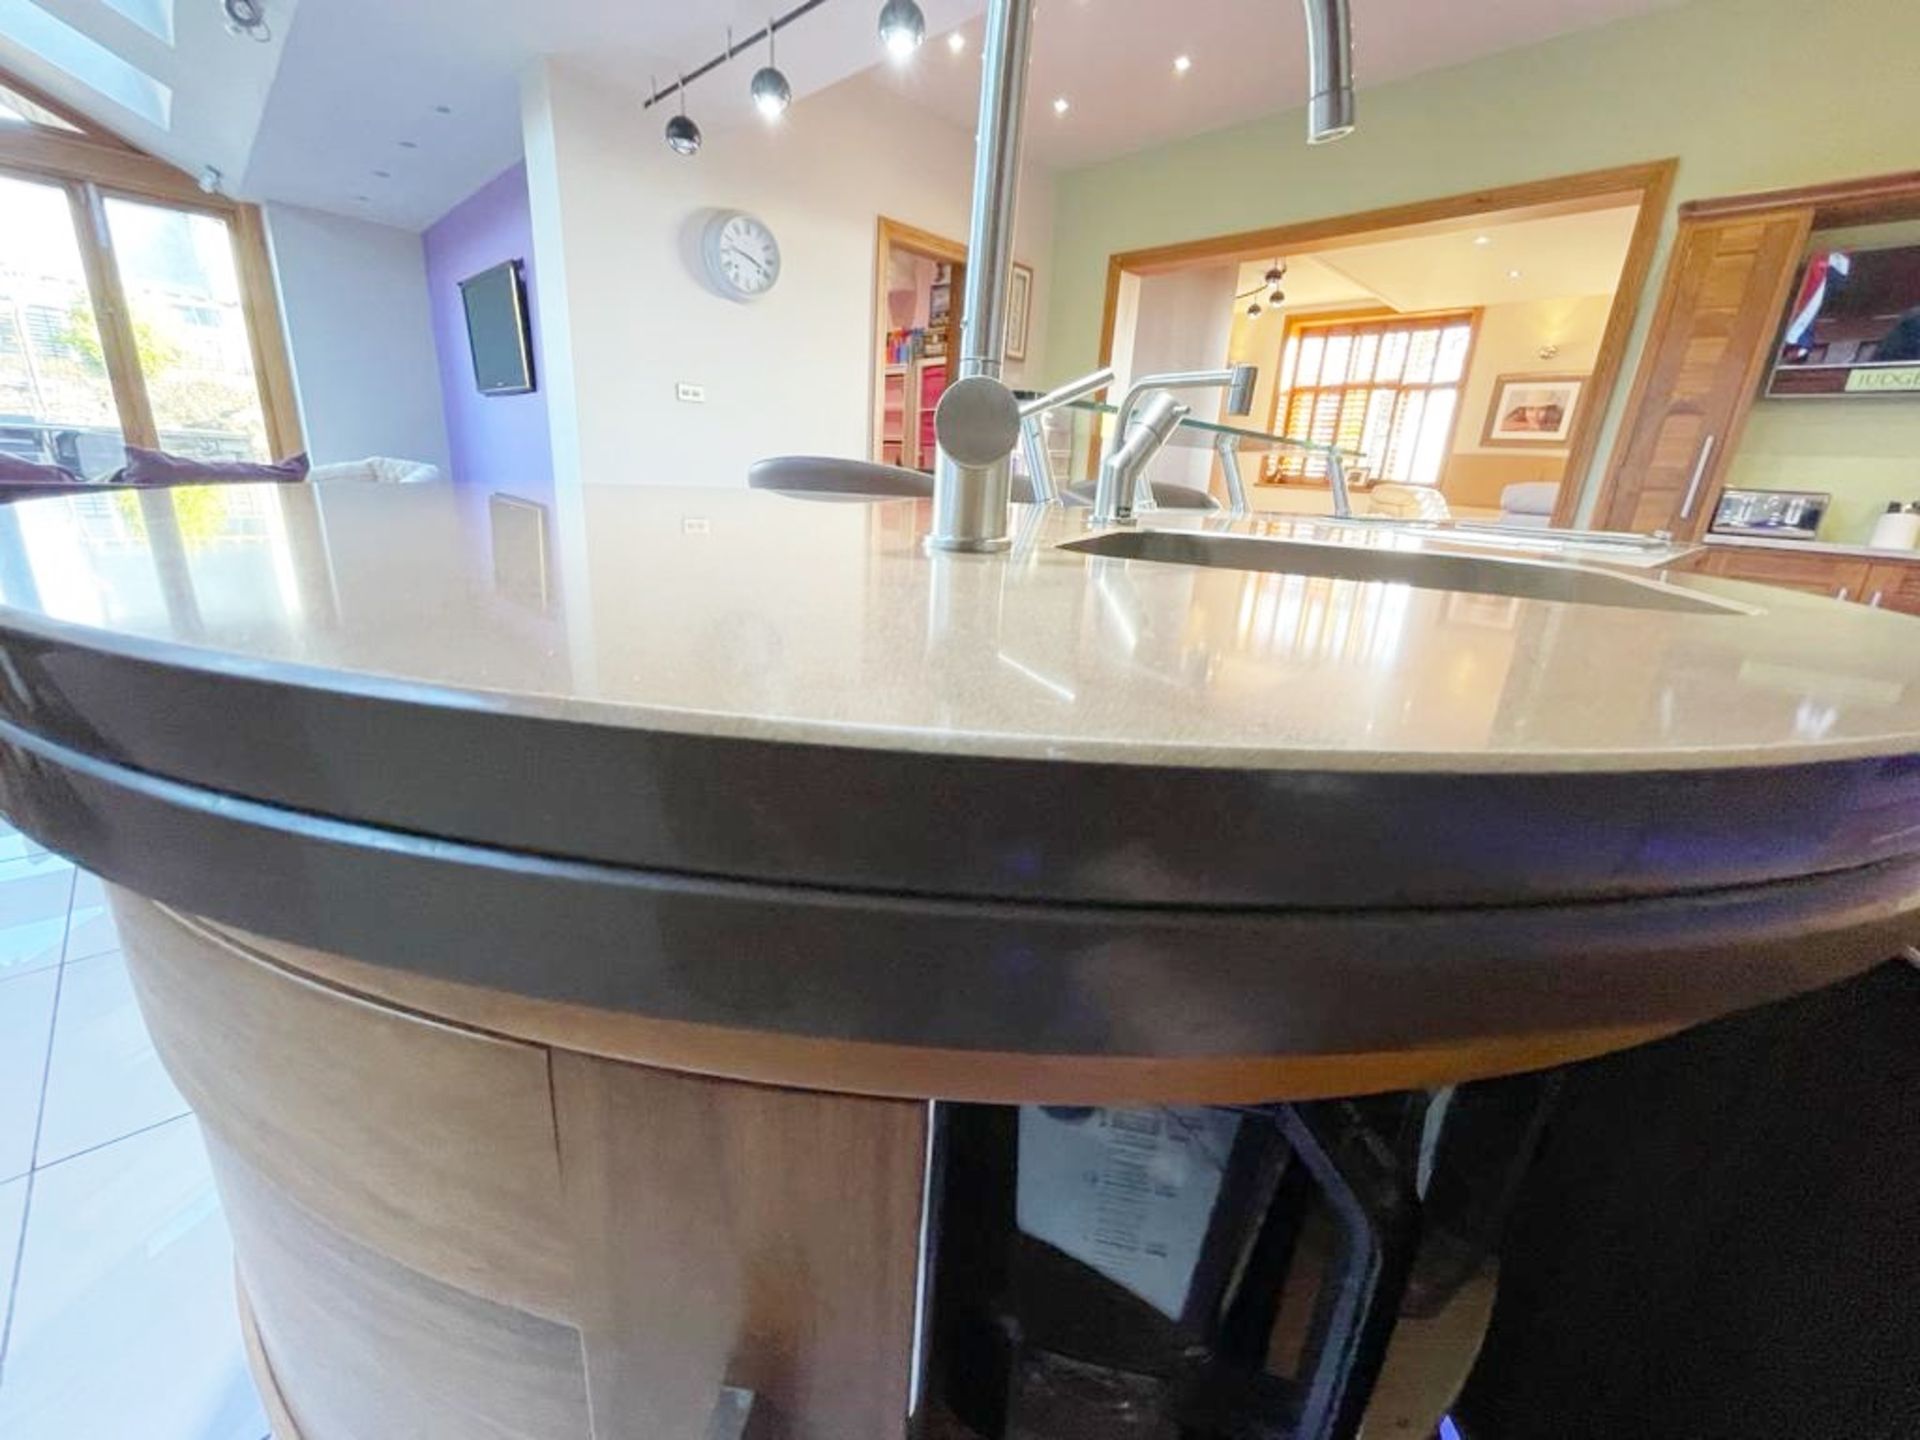 1 x Bespoke Curved Fitted Kitchen With Solid Wood Walnut Doors, Integrated Appliances, Granite Tops - Image 81 of 147